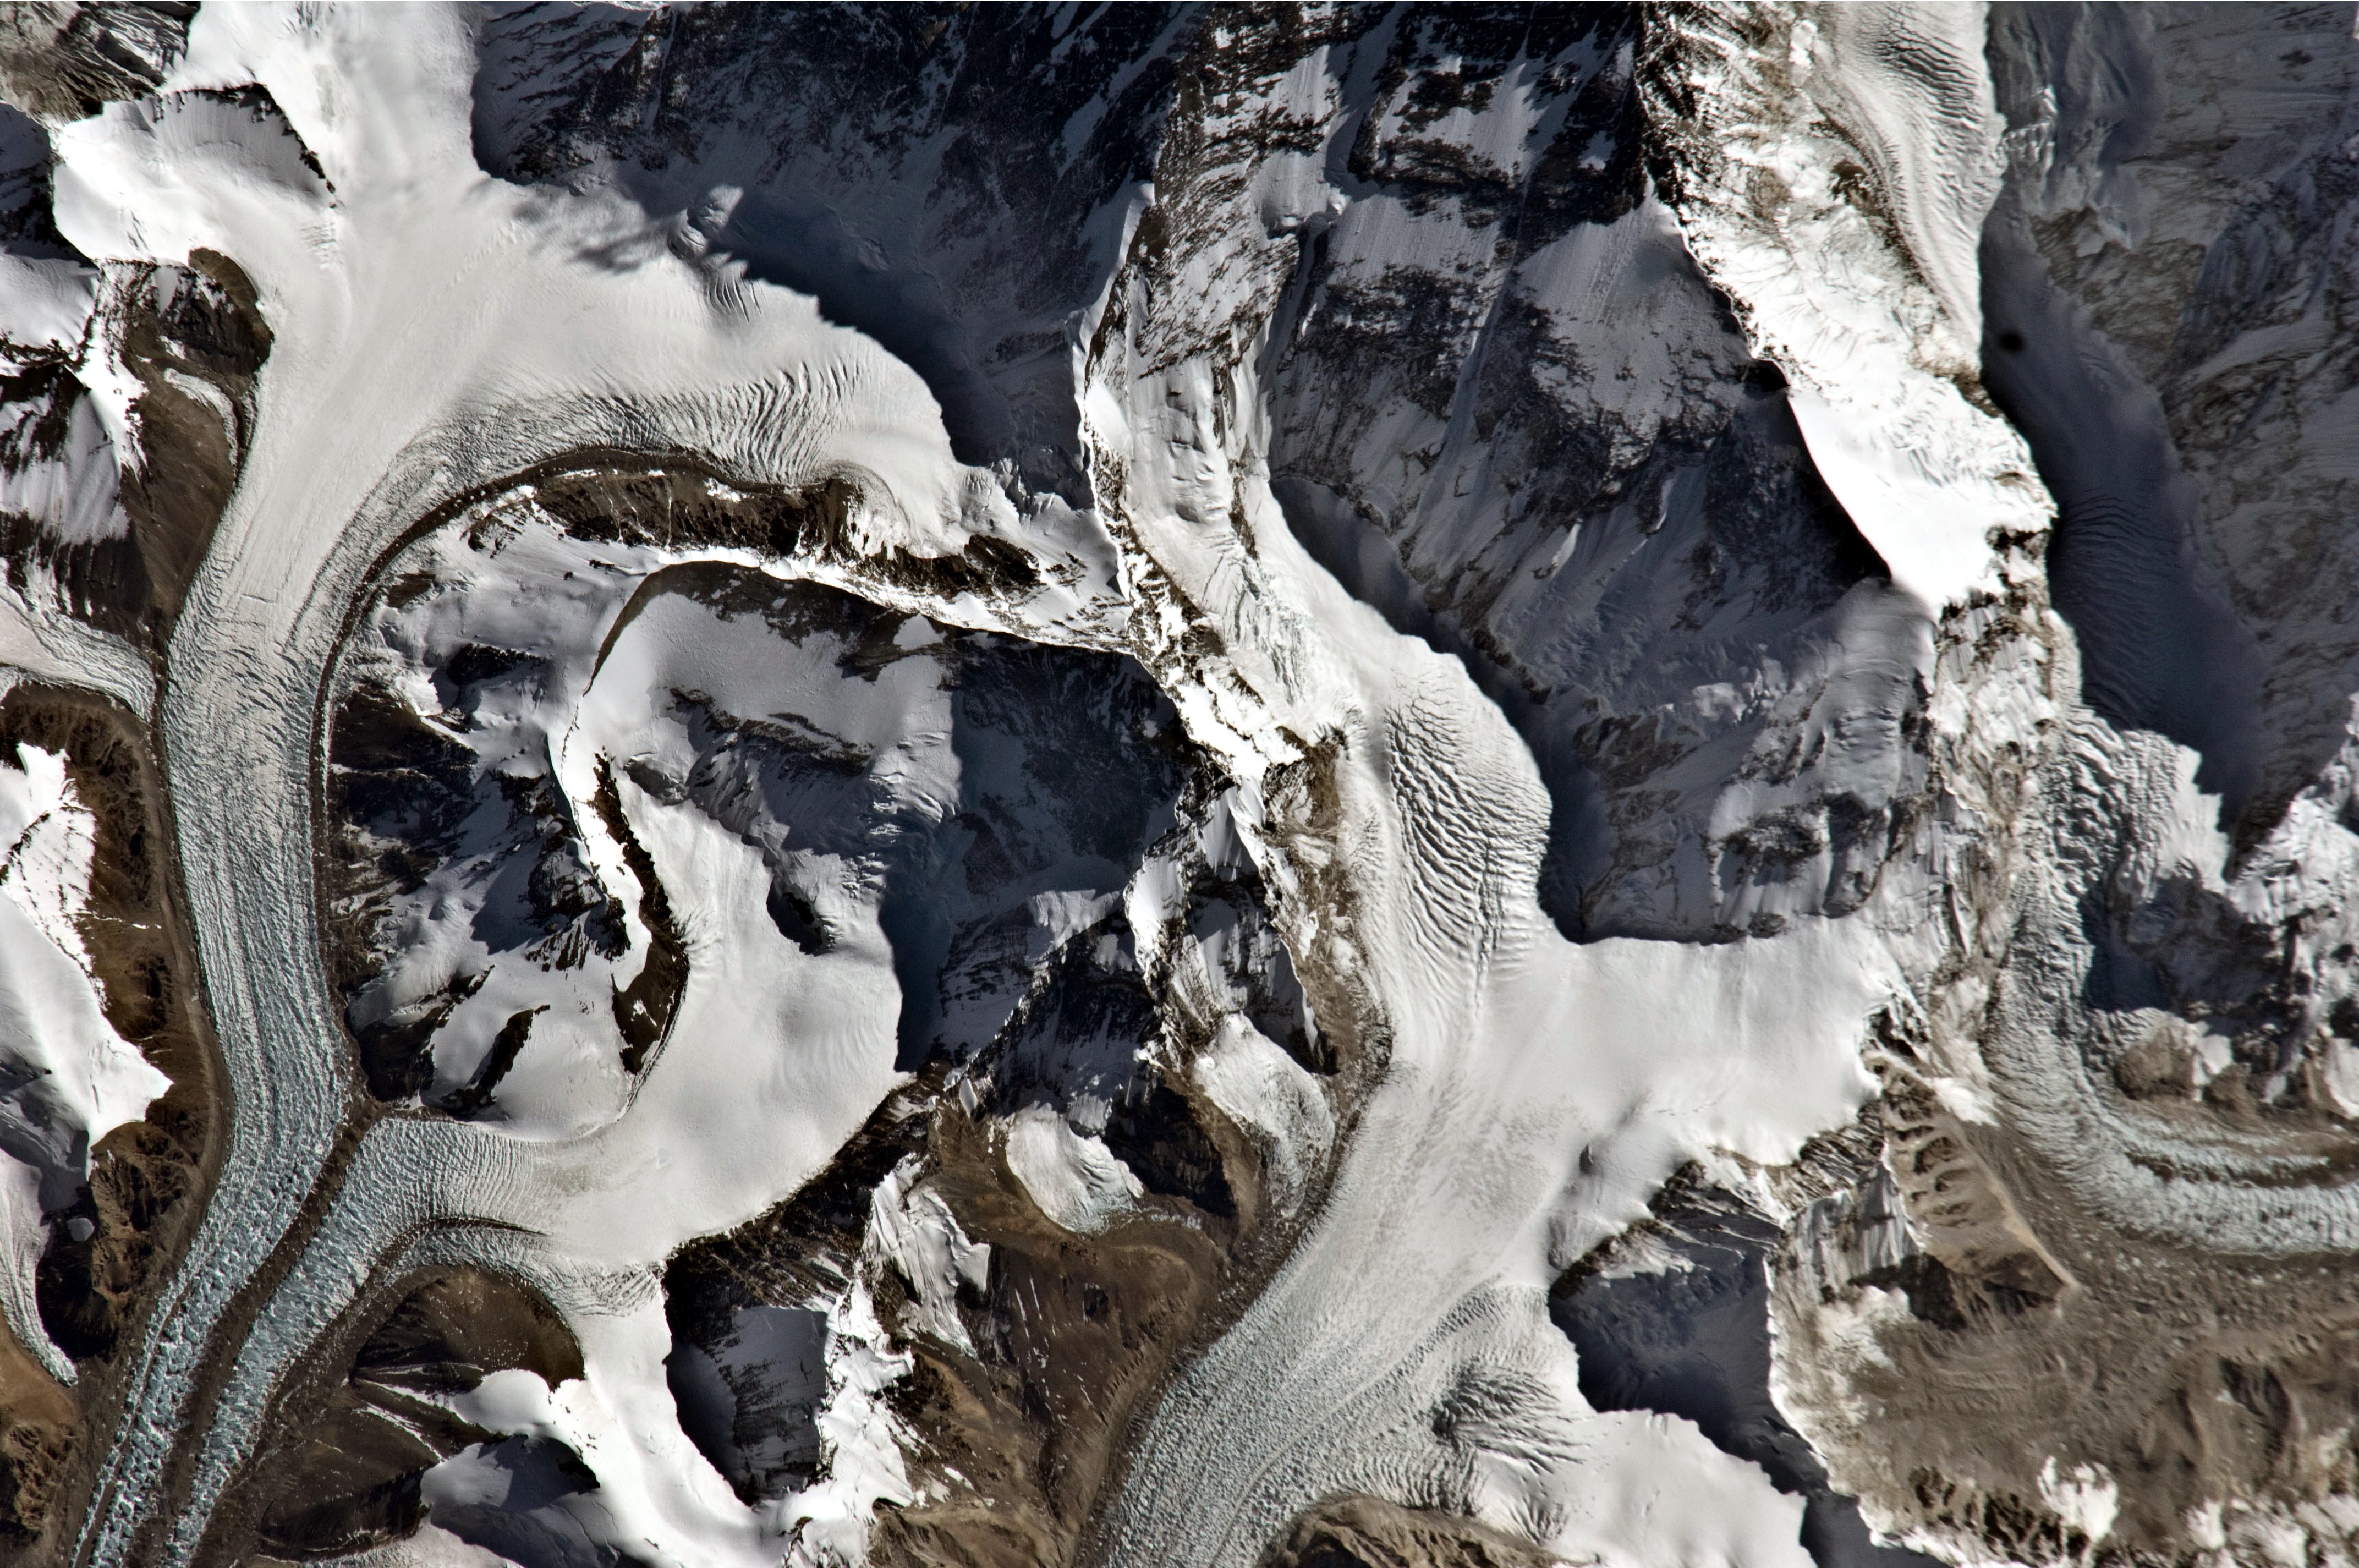 File:North Col of Mount Everest.JPG - Wikipedia